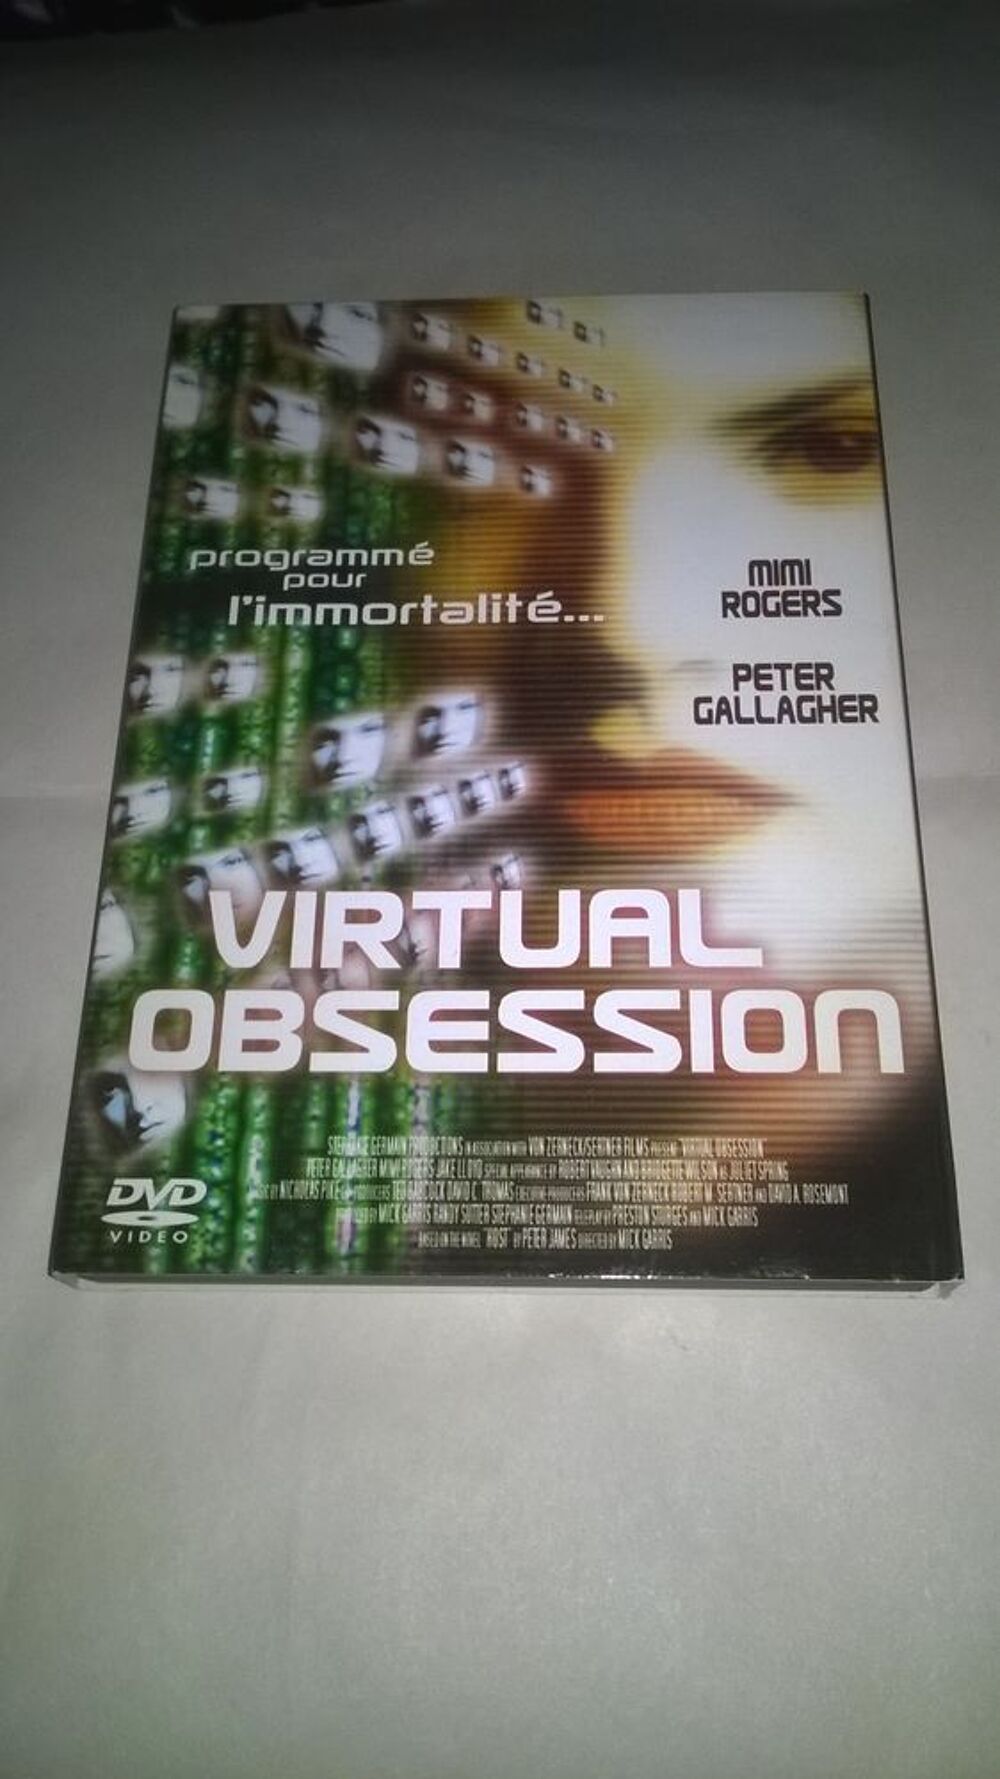 DVD Virtual Obsession
Peter Gallagher - Mimi Rogers 
2005
Ex DVD et blu-ray